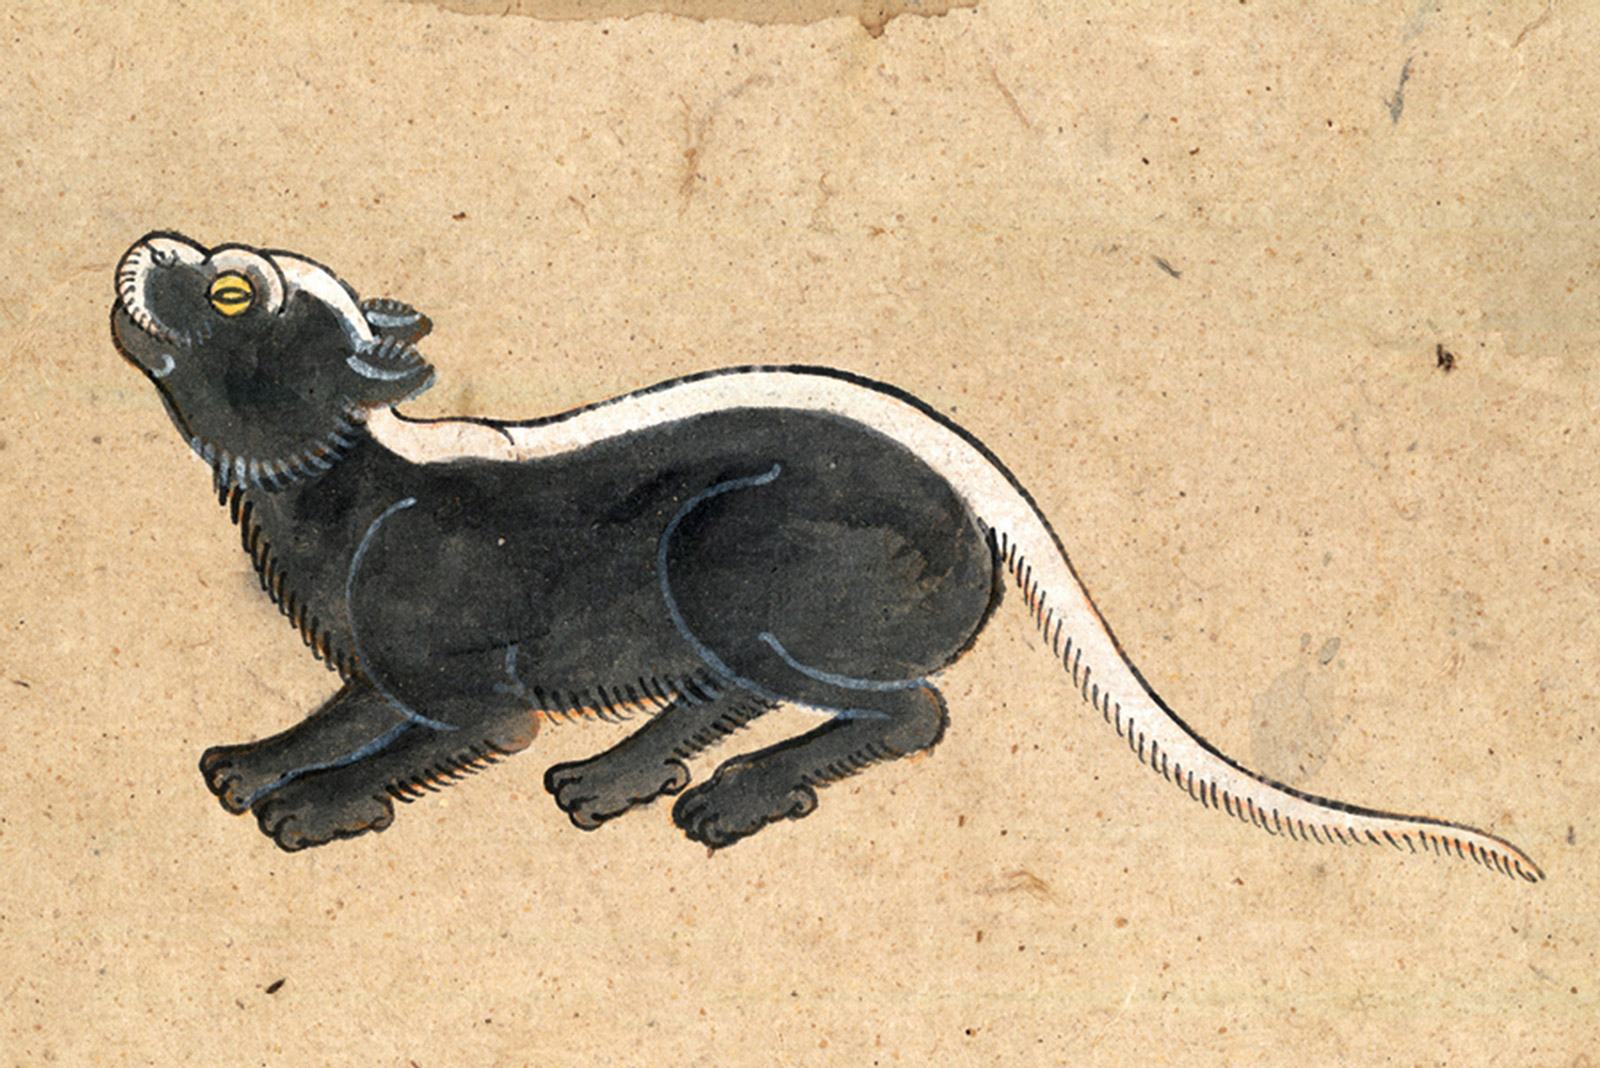 An illustration of a Pat-sawet (White Line) or Pattalort (Line Throughout) cat from a mid-nineteenth-century manuscript titled “Tamra Maew.” The accompanying caption reads: “The white line goes from the nose,
white, all along to the tail, a rarity.
Mixed, alternating to the eye. A short body,
Eyes like golden sands of yellow topaz”